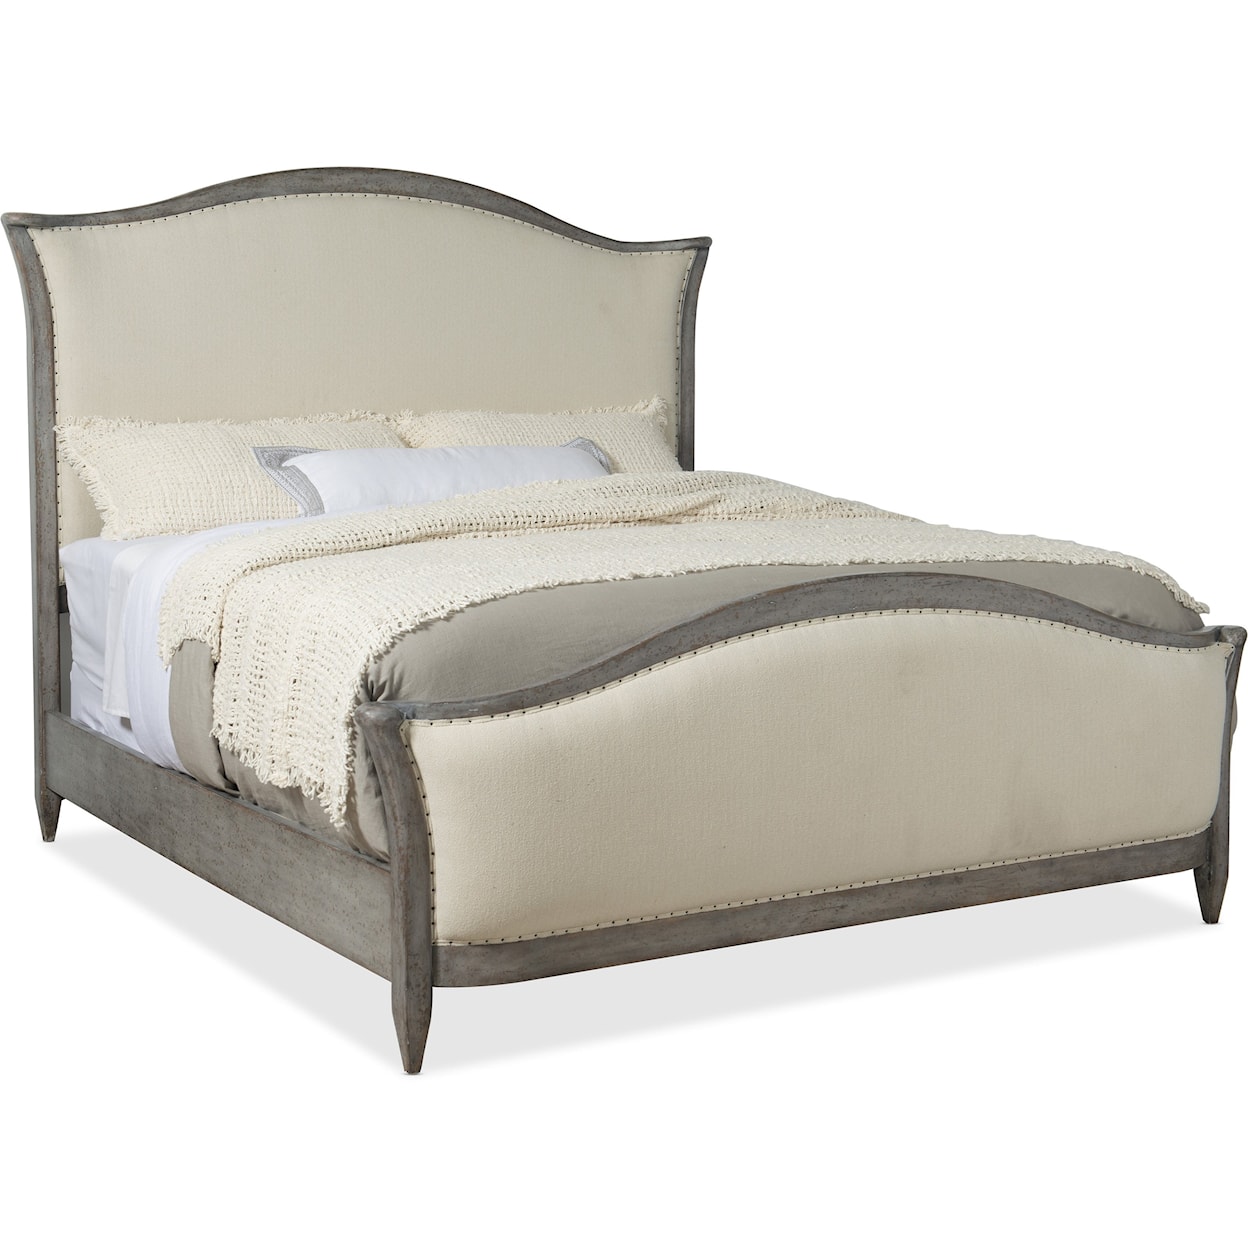 Hooker Furniture Ciao Bella California King Upholstered Bed